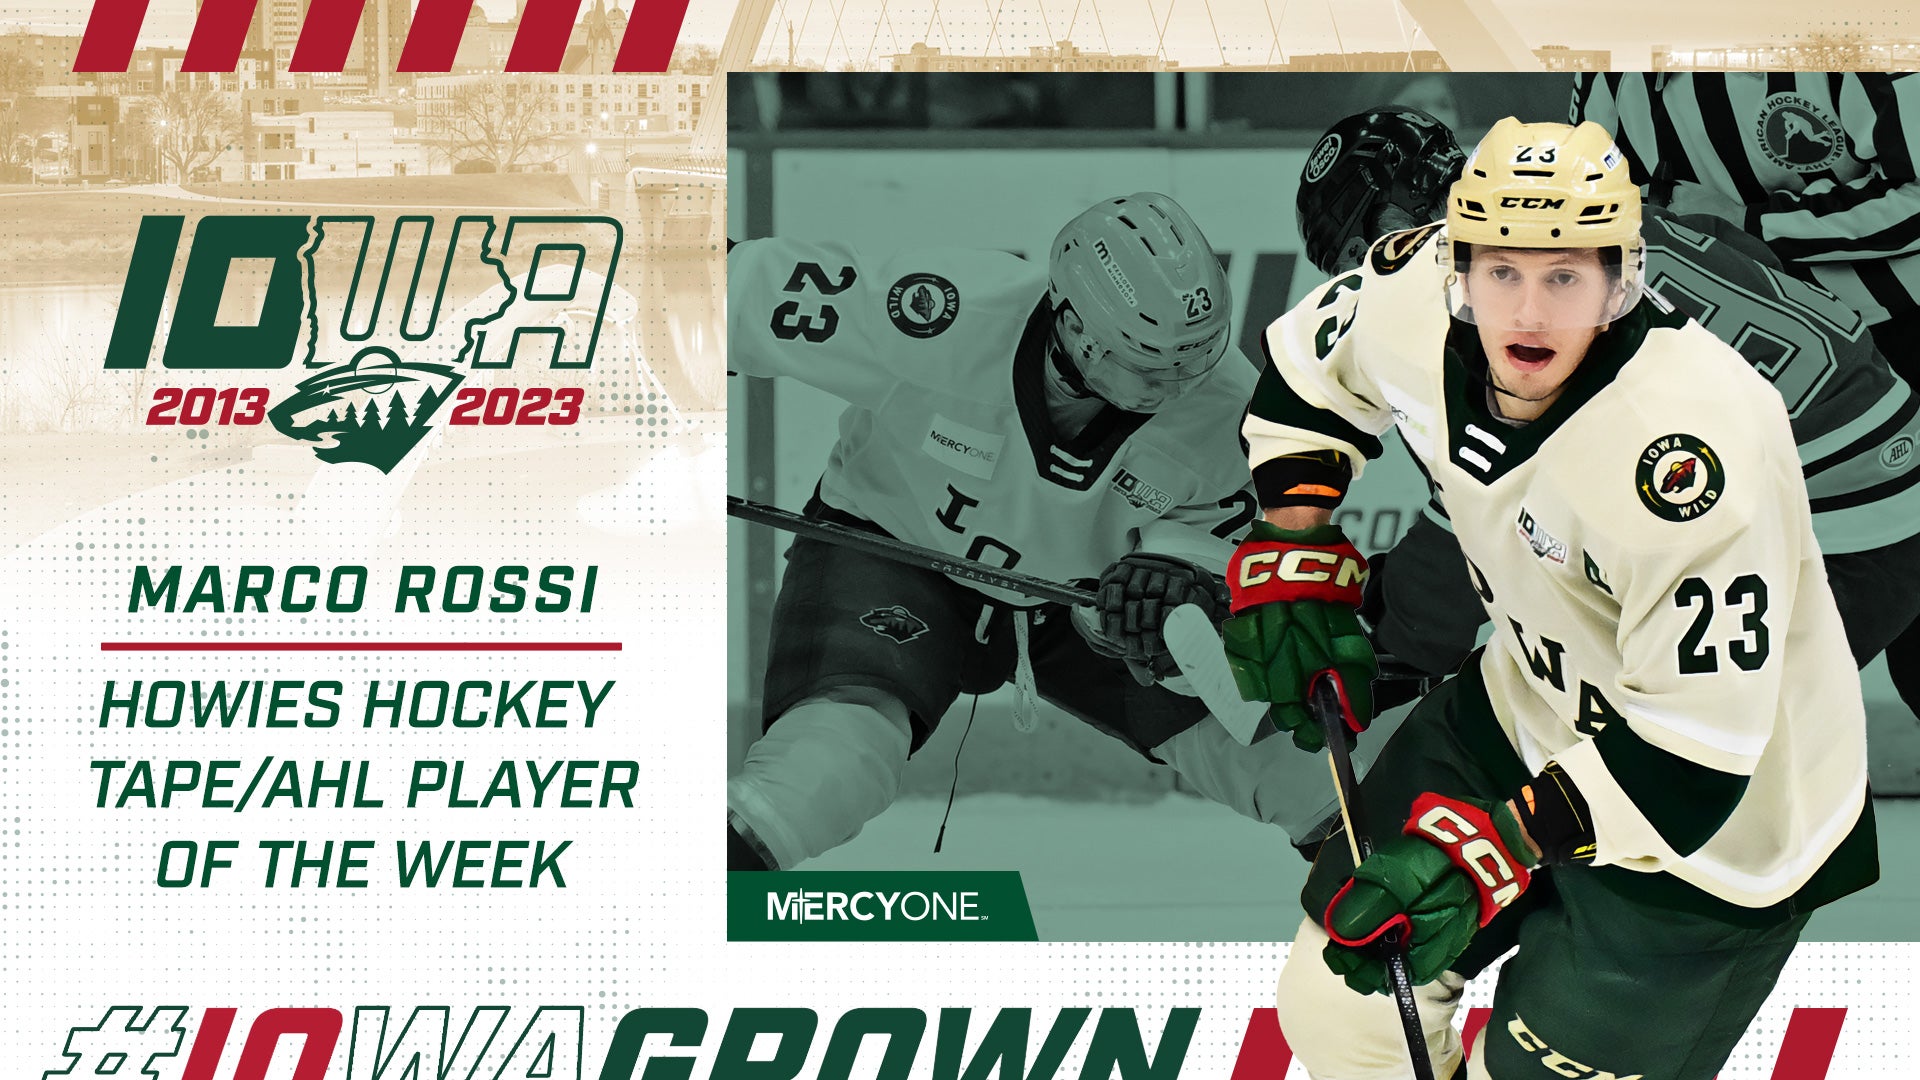 MARCO ROSSI NAMED AHL PLAYER OF THE WEEK